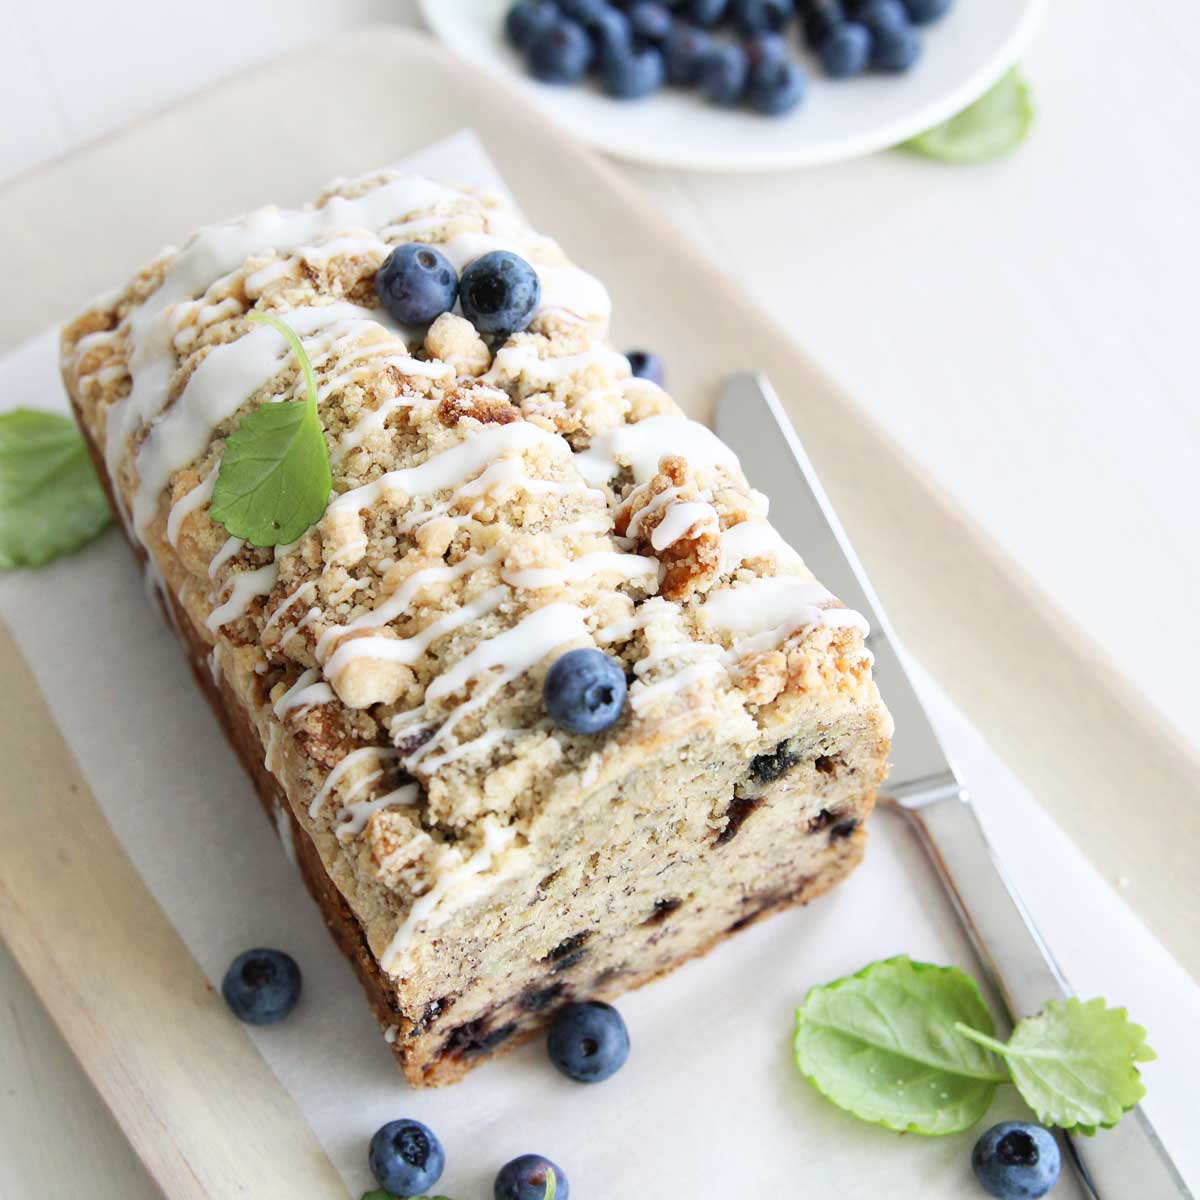 Blueberry Banana Bread with Oats & Streusel (Eggless, Dairy Free) - Blueberry Banana Bread